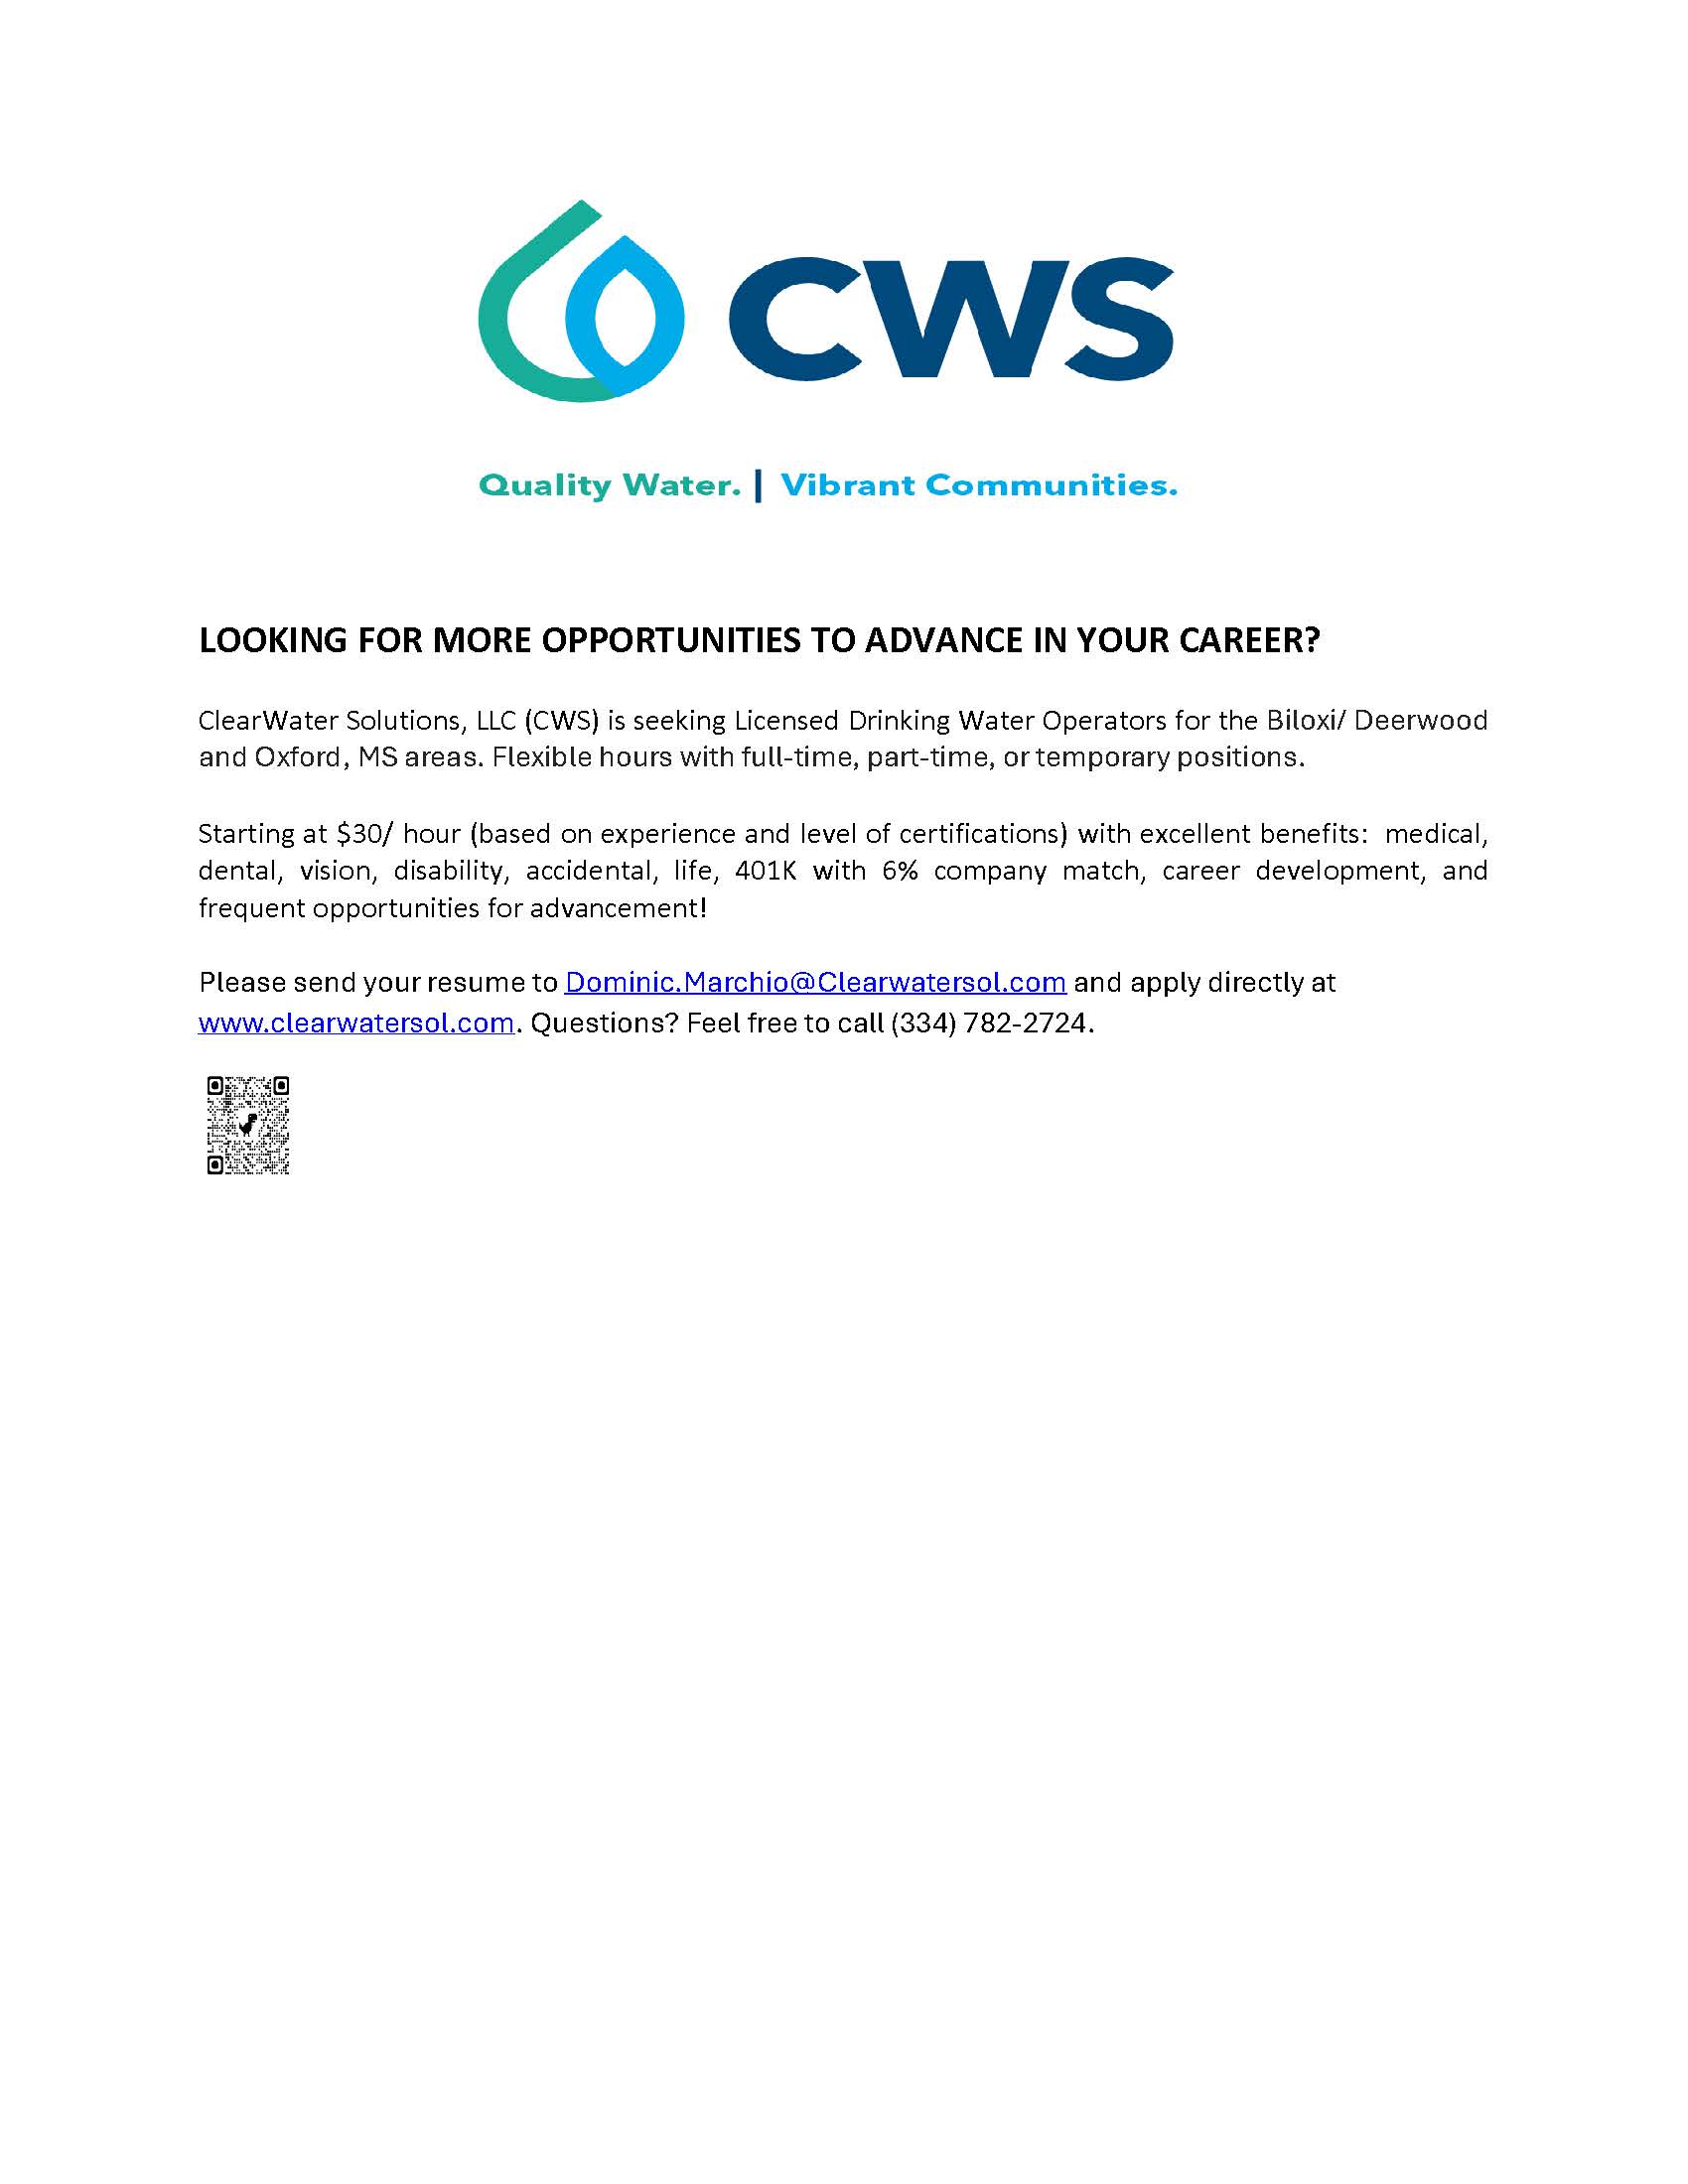 ClearWater Solutions, Inc. is hiring water operators.